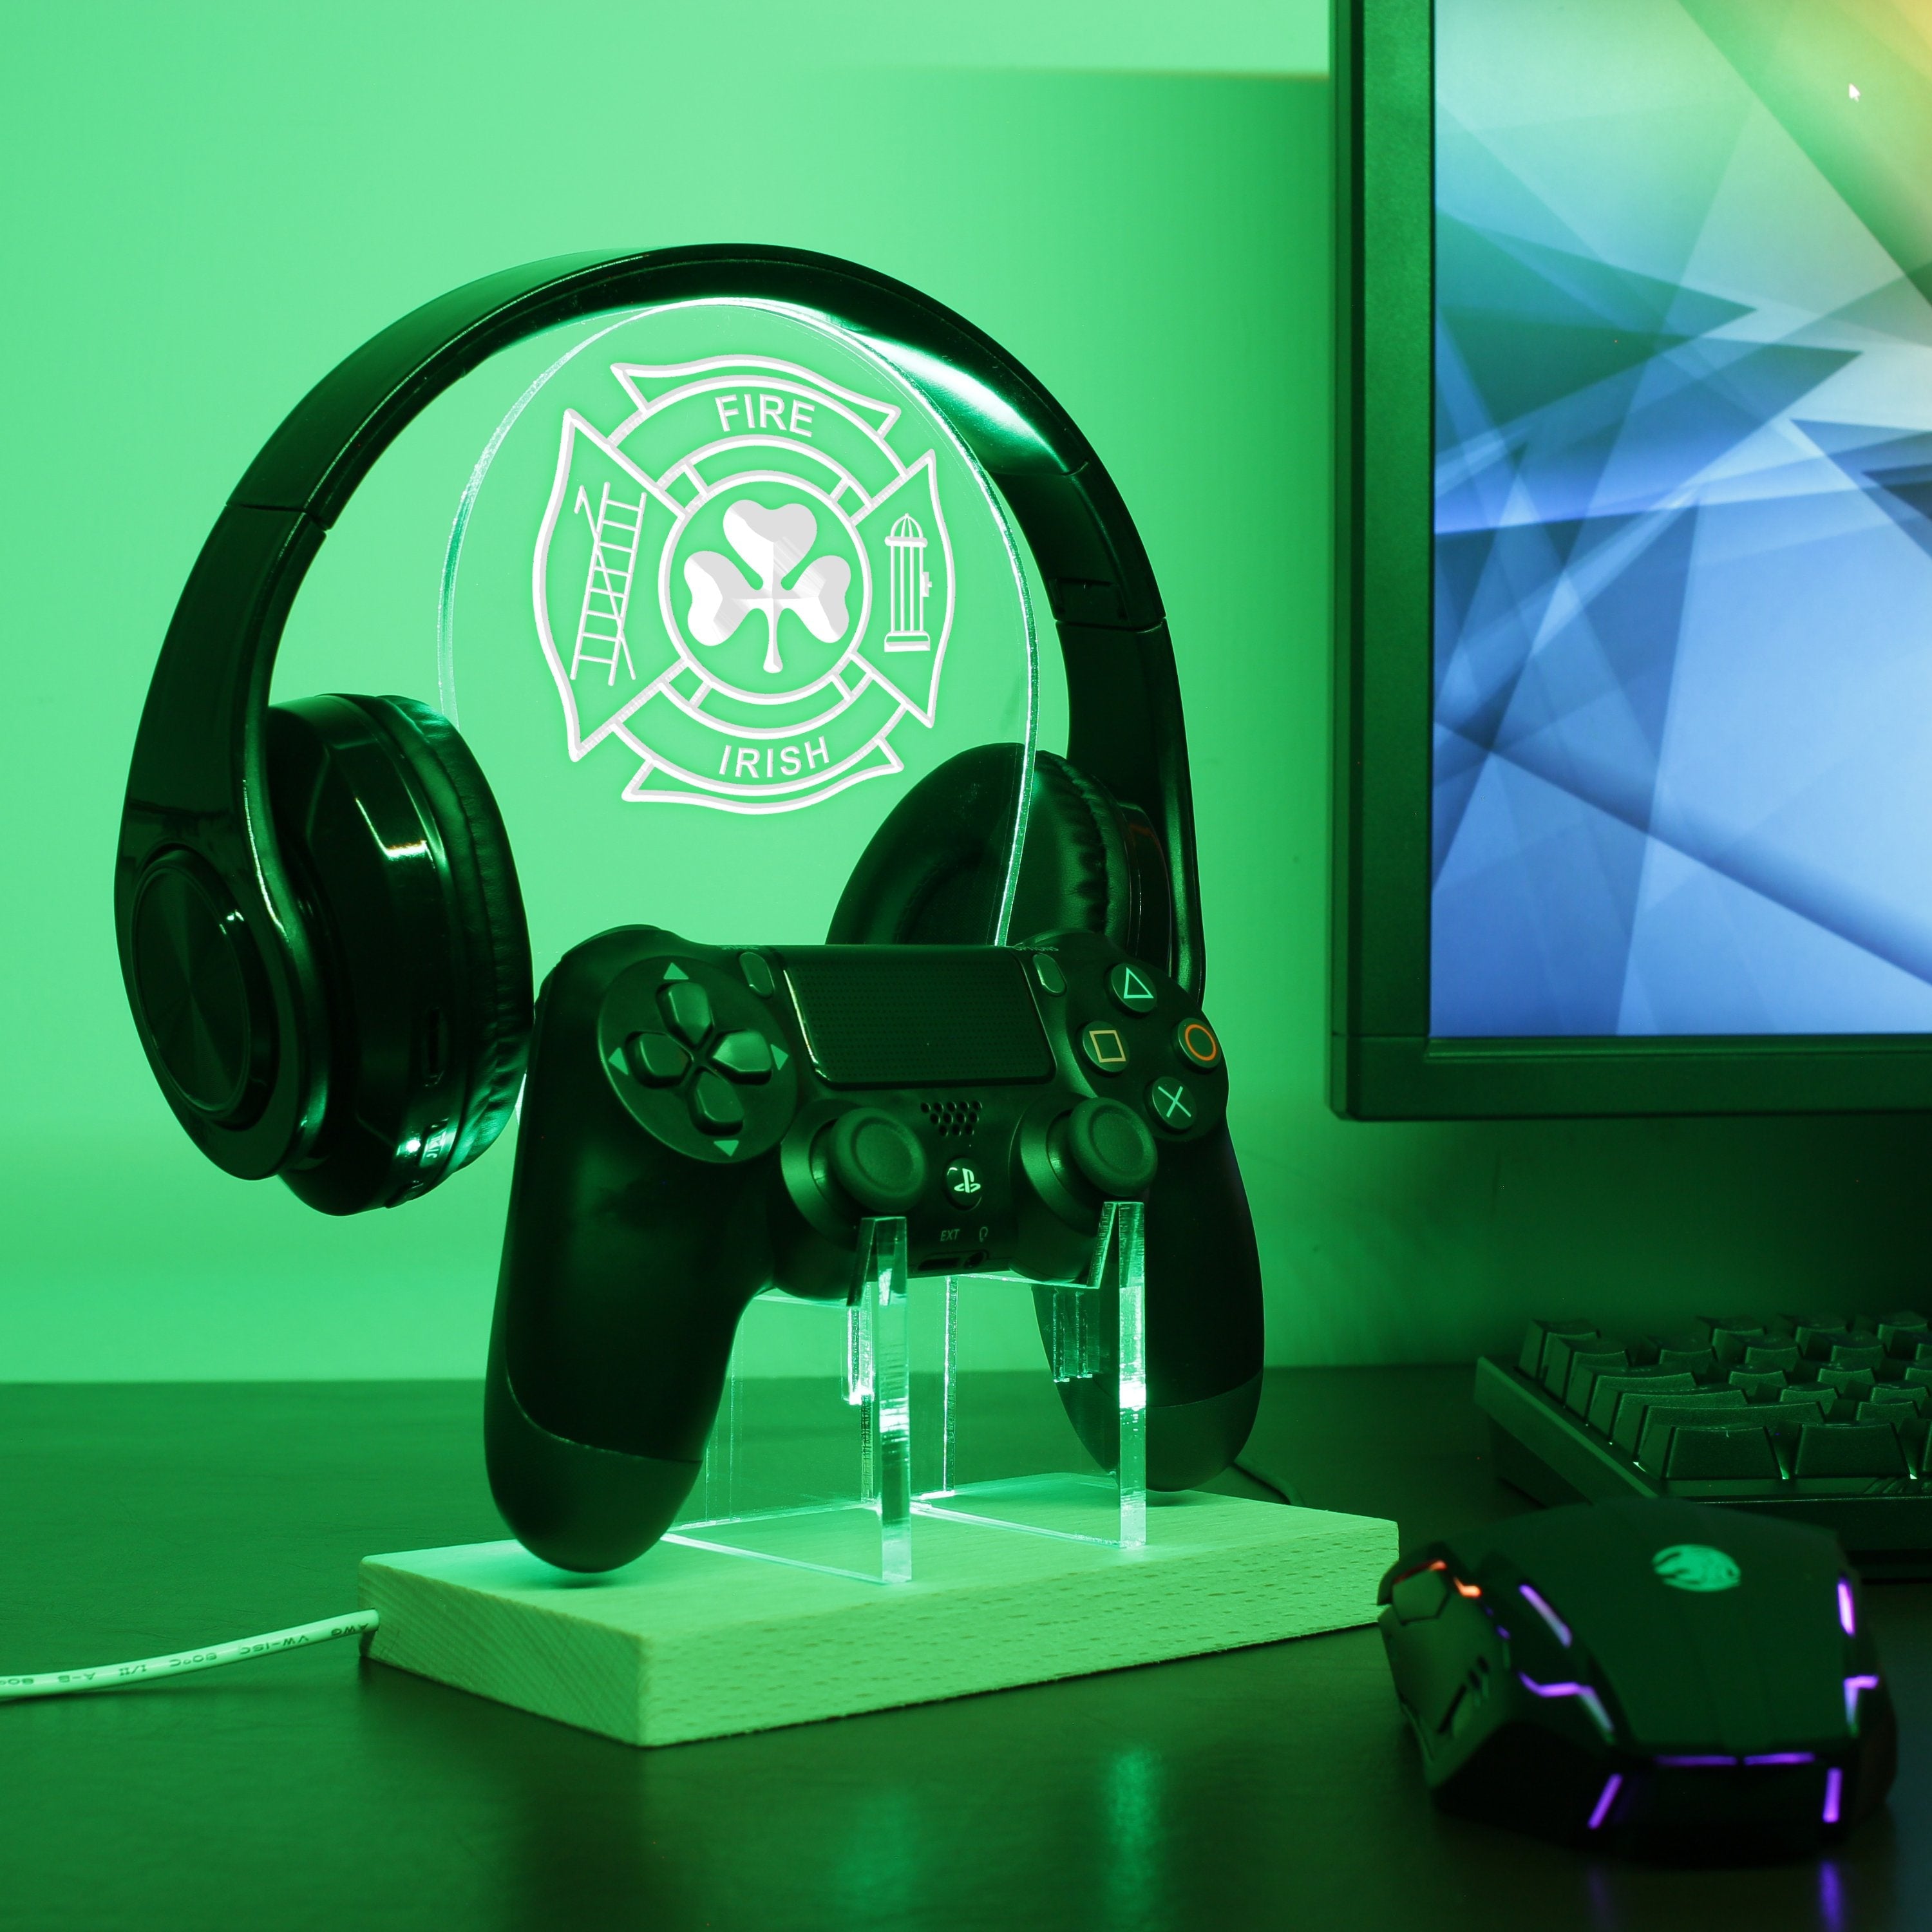 PENN Reels LED Gaming Headset Controller Stand